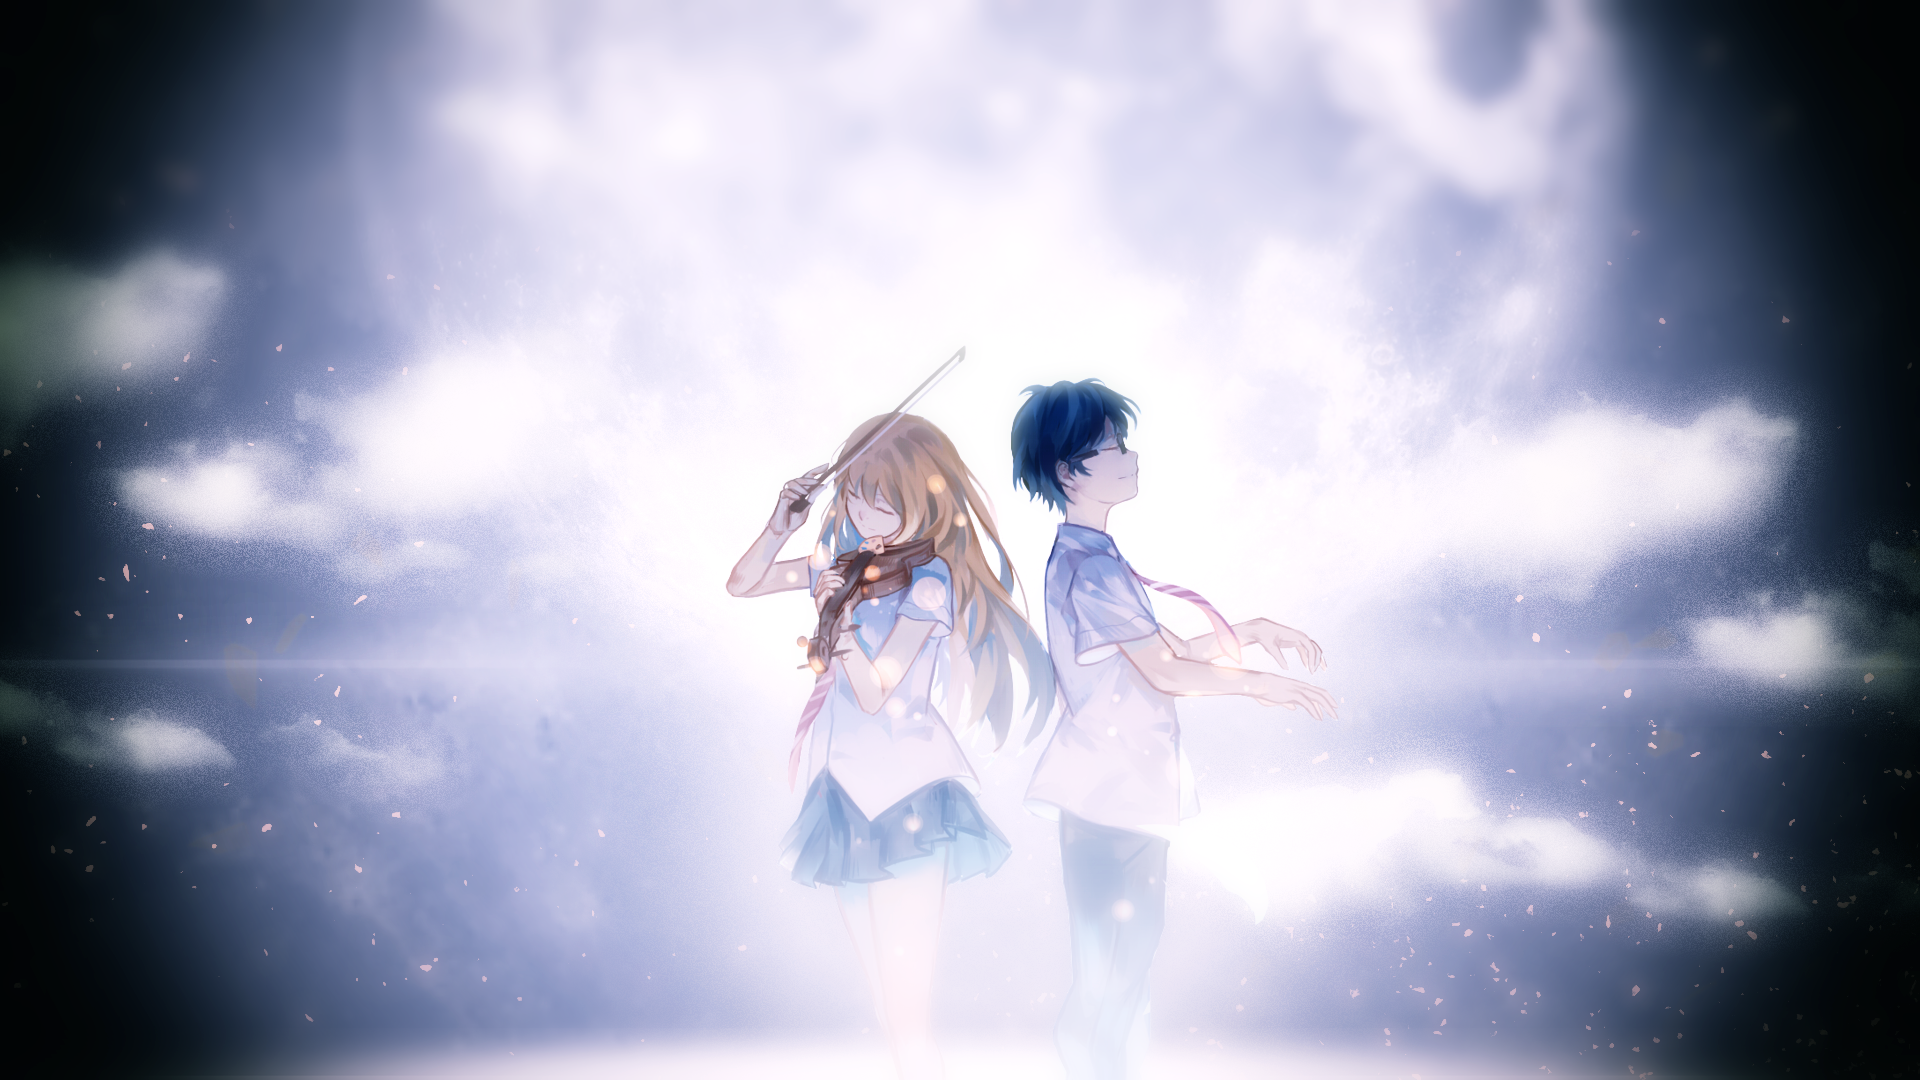 Your Lie In April Wallpaper by